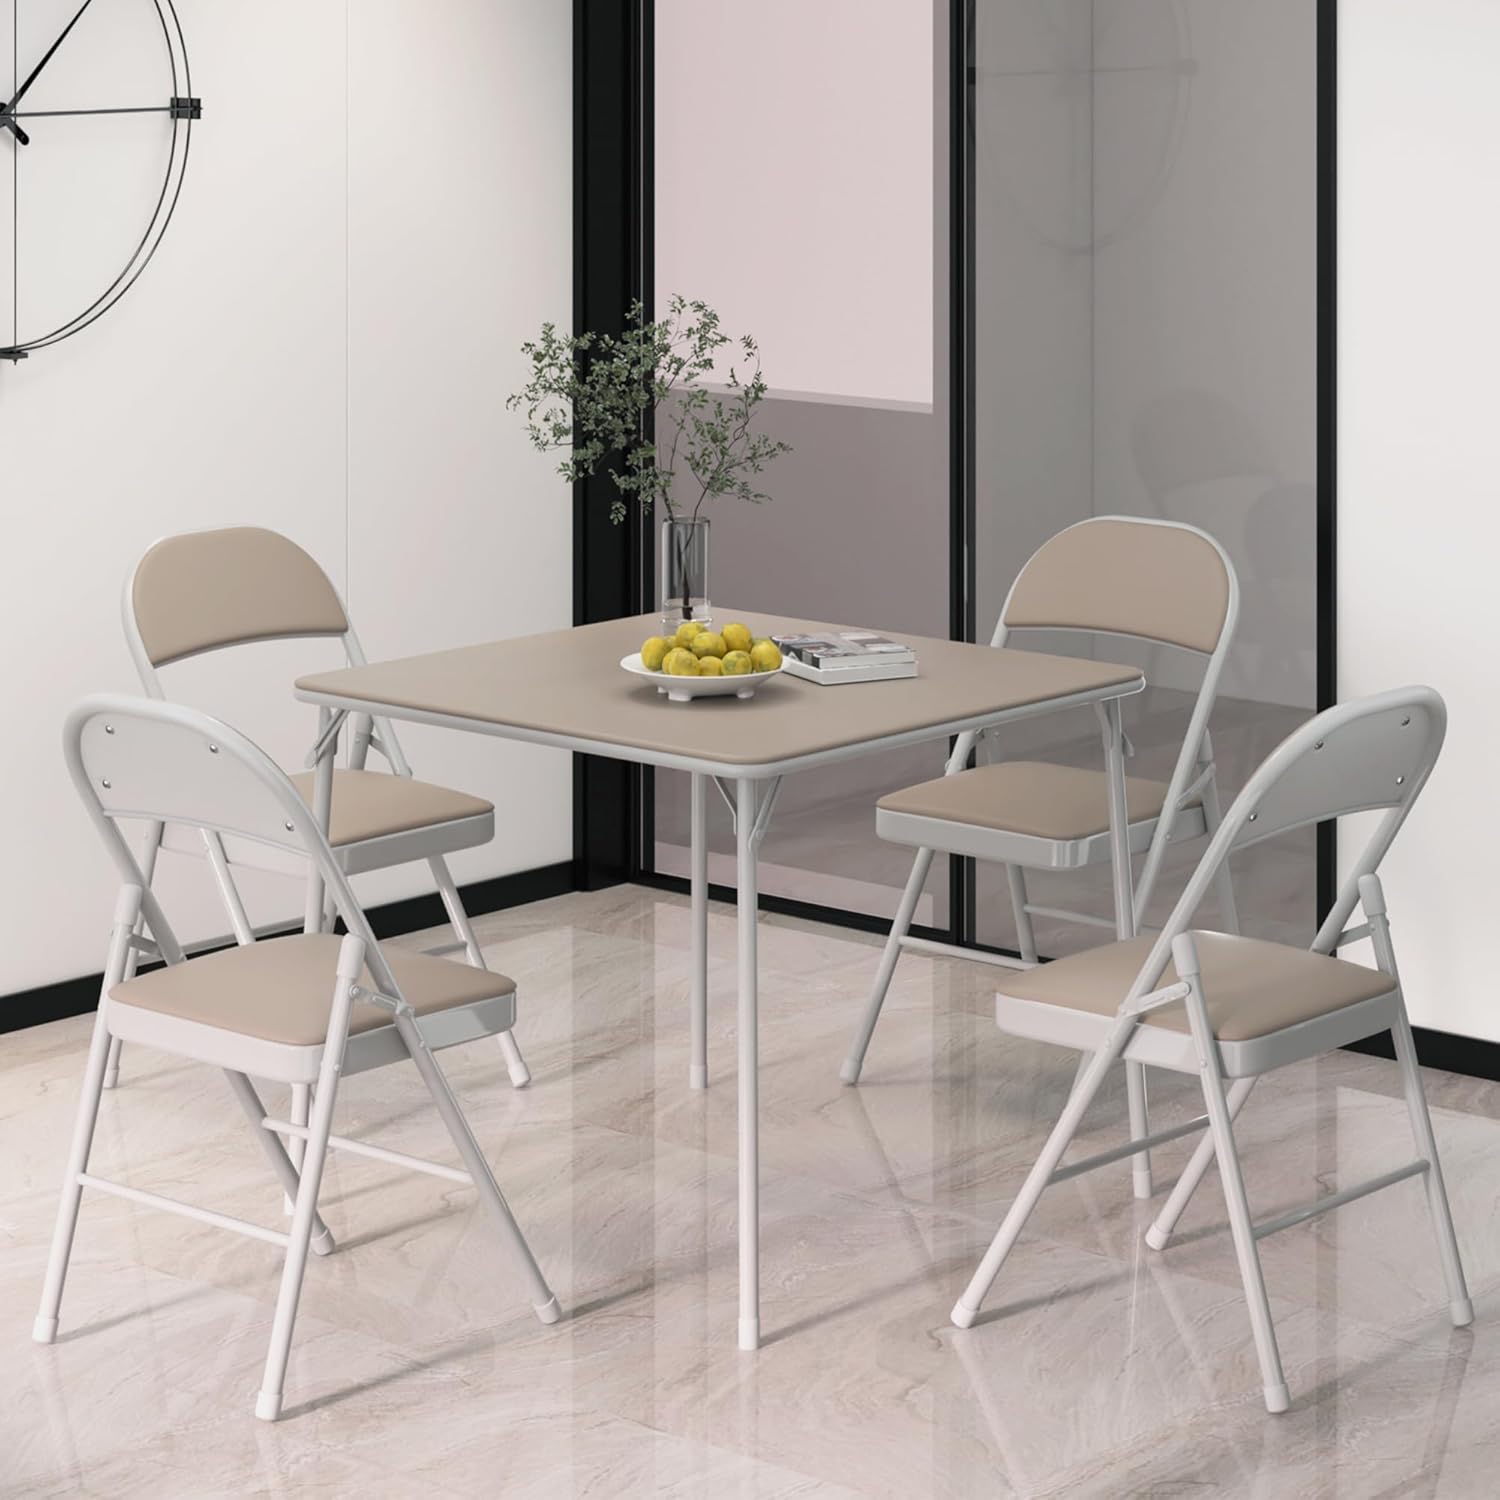 VECELO Portable Folding Card Table Square and Chair Sets with Collapsible Legs & Vinyl Upholstery (5 PCS)